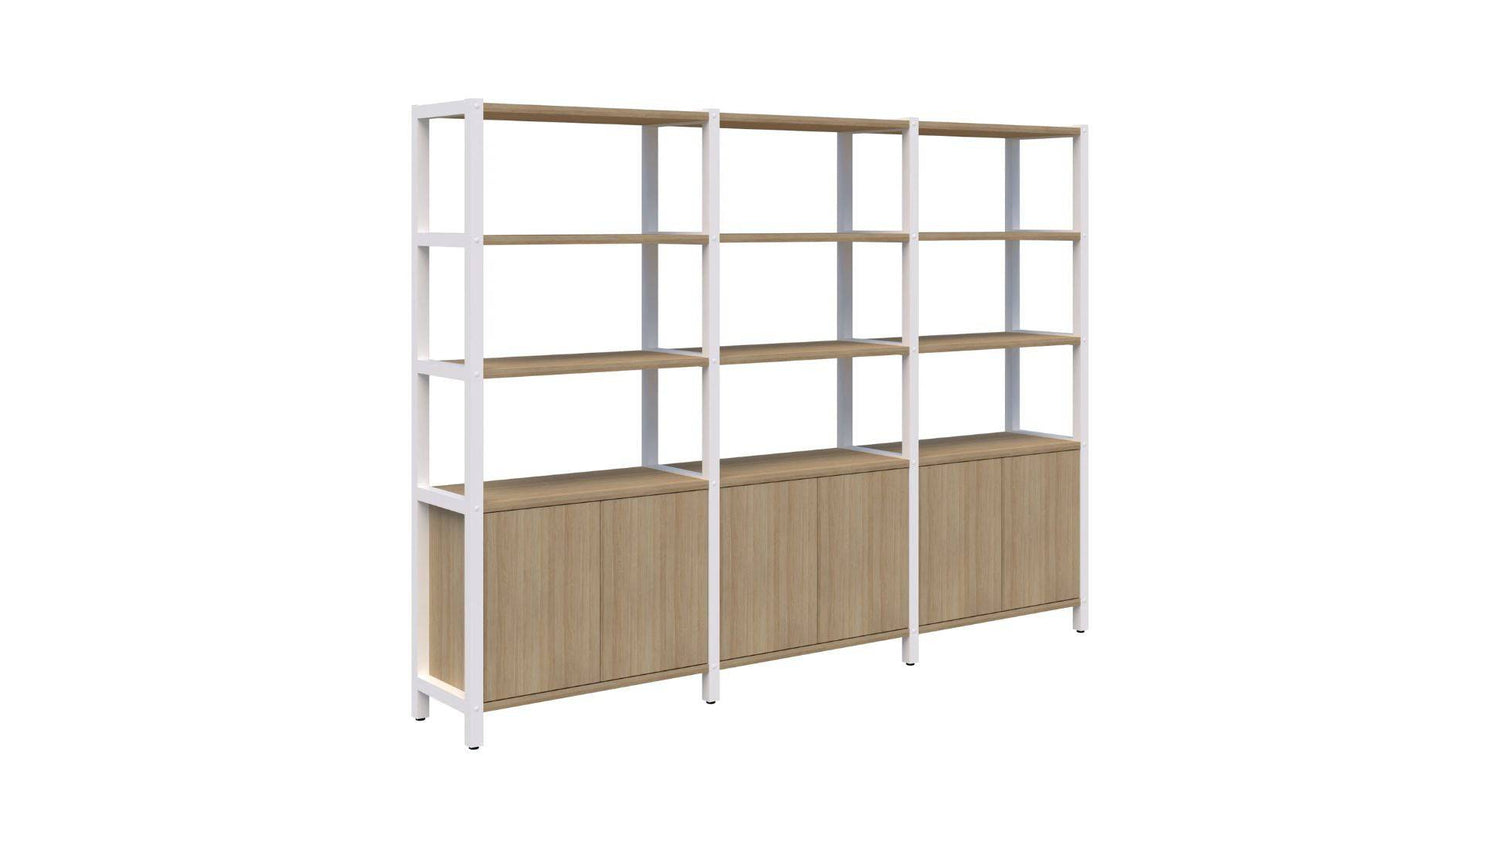 Filing and Storage Open Display Wall - 4 Tier Grid 40 Range